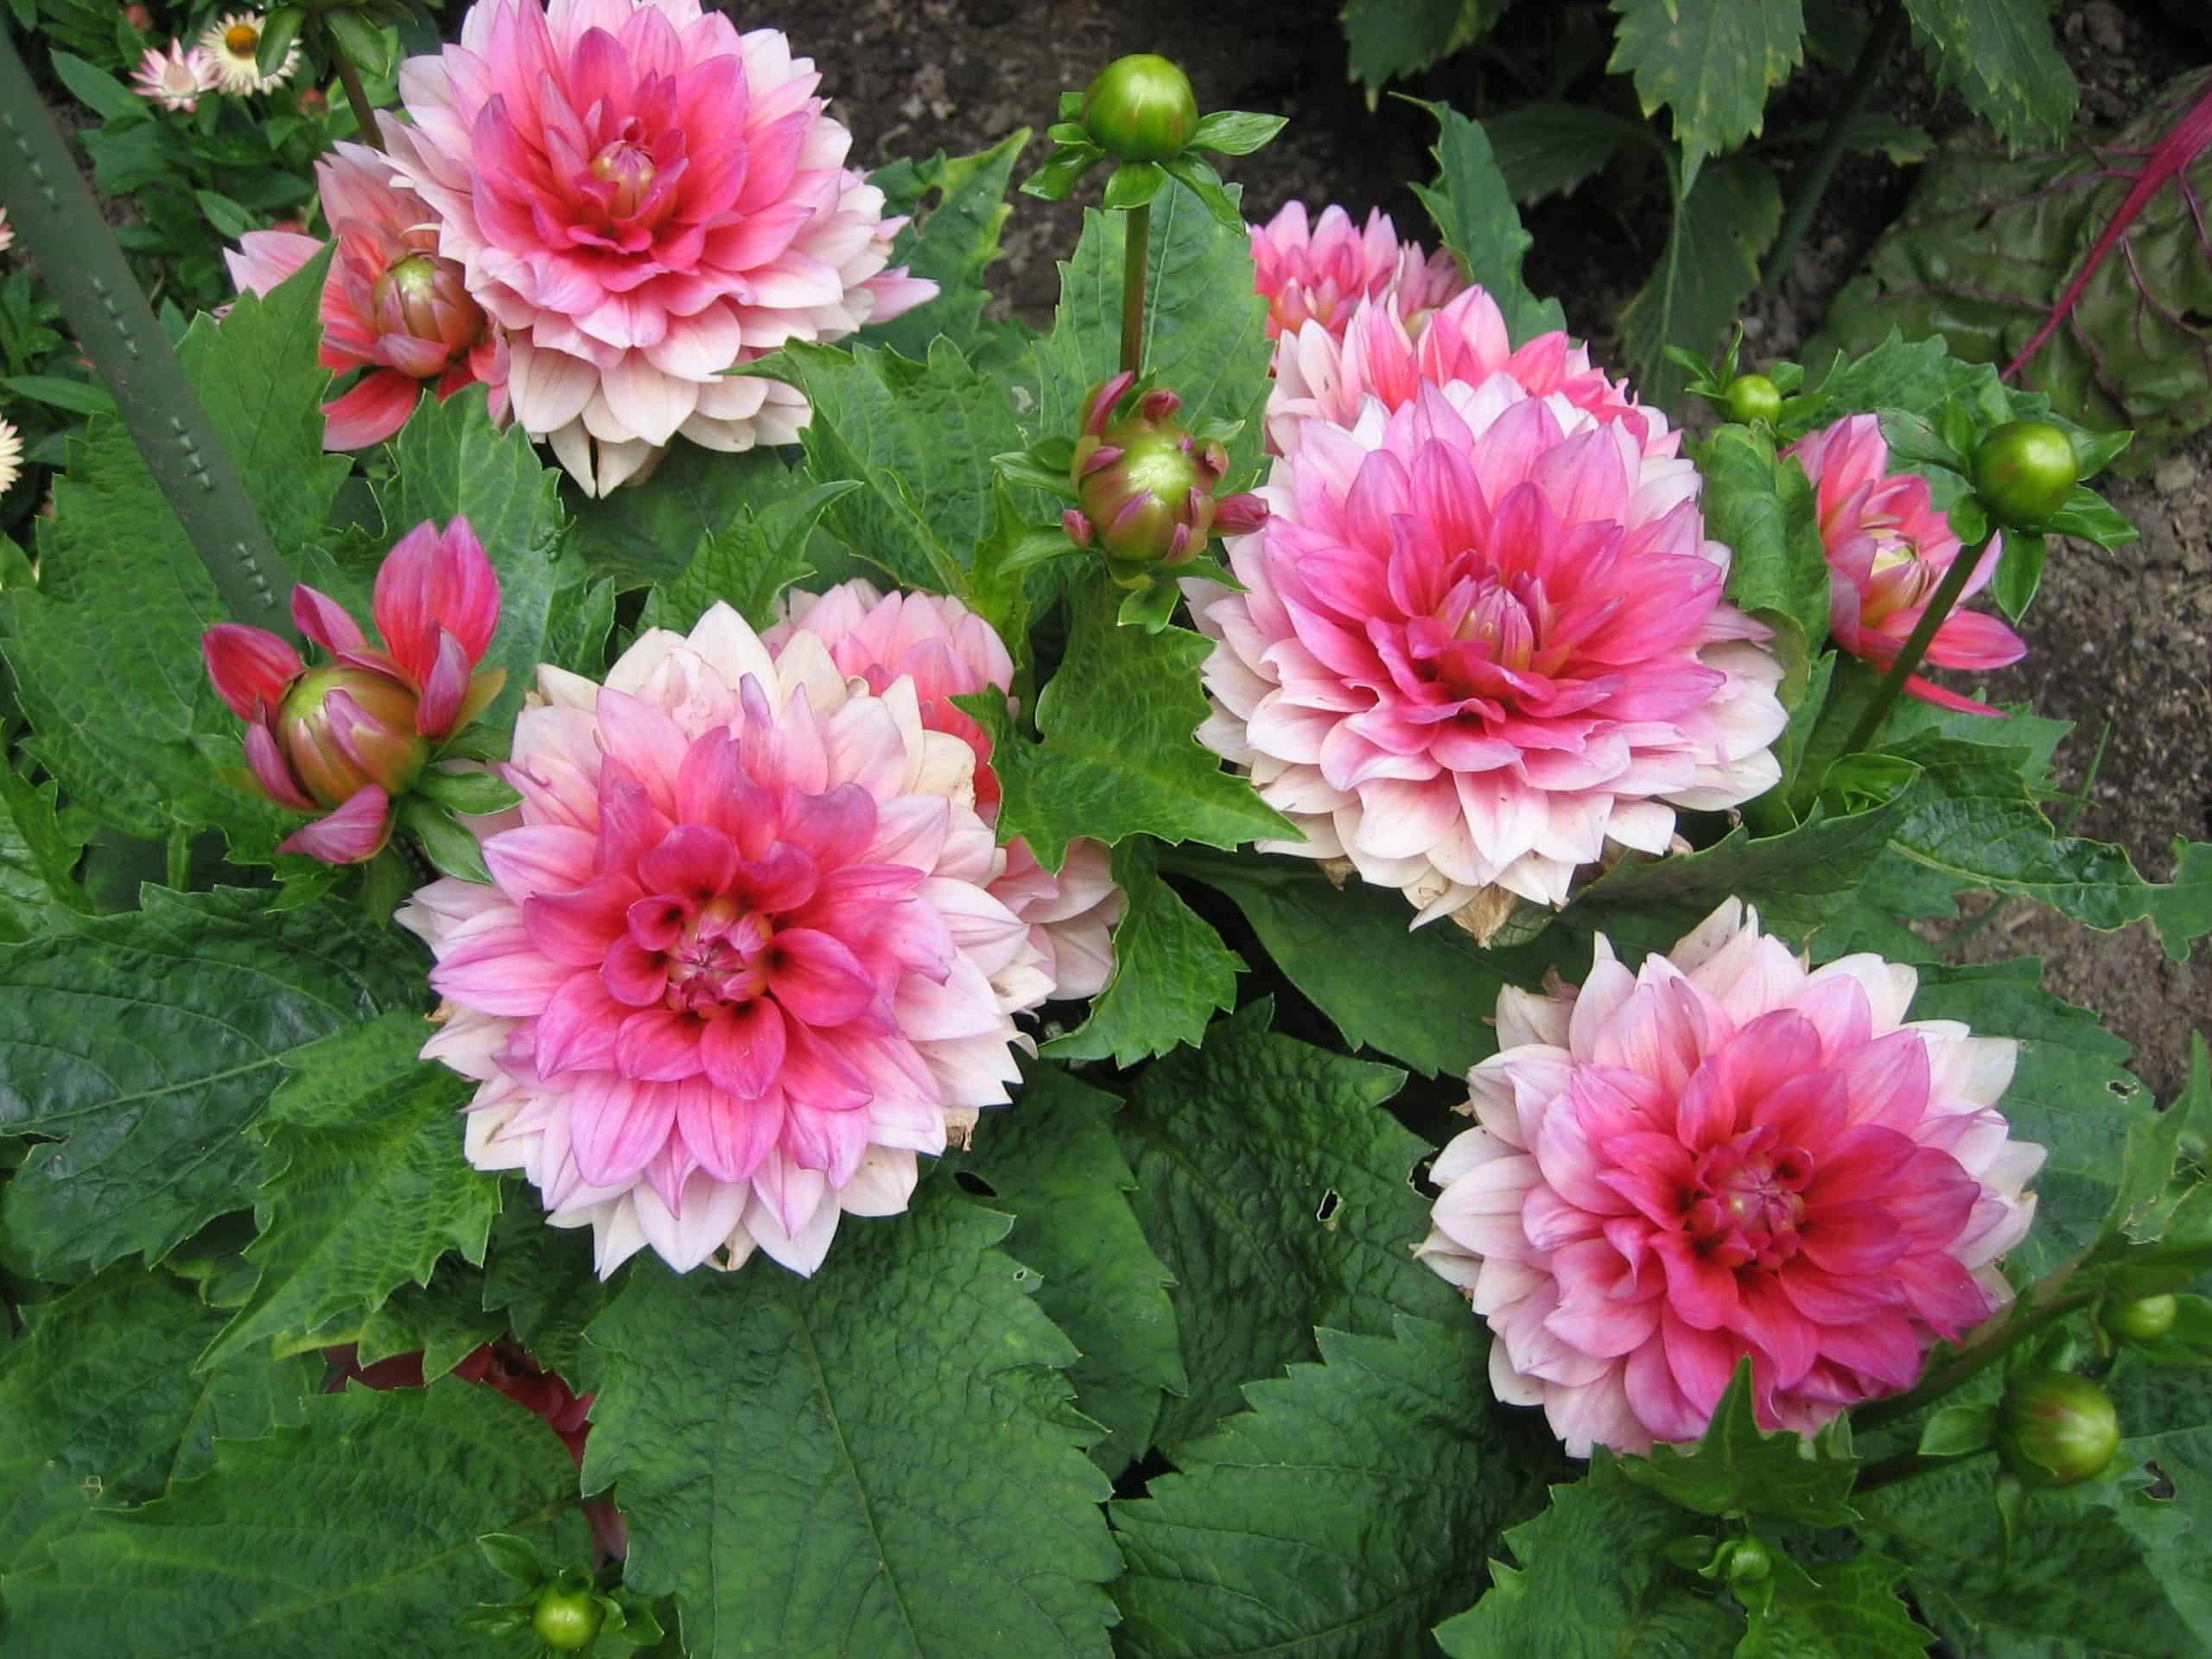 Compact 'Berliner Kleene' grows about 18 inches (45 cm) tall. Plants have crinkled foliage and produce dozens of  pinkish-coral blooms.